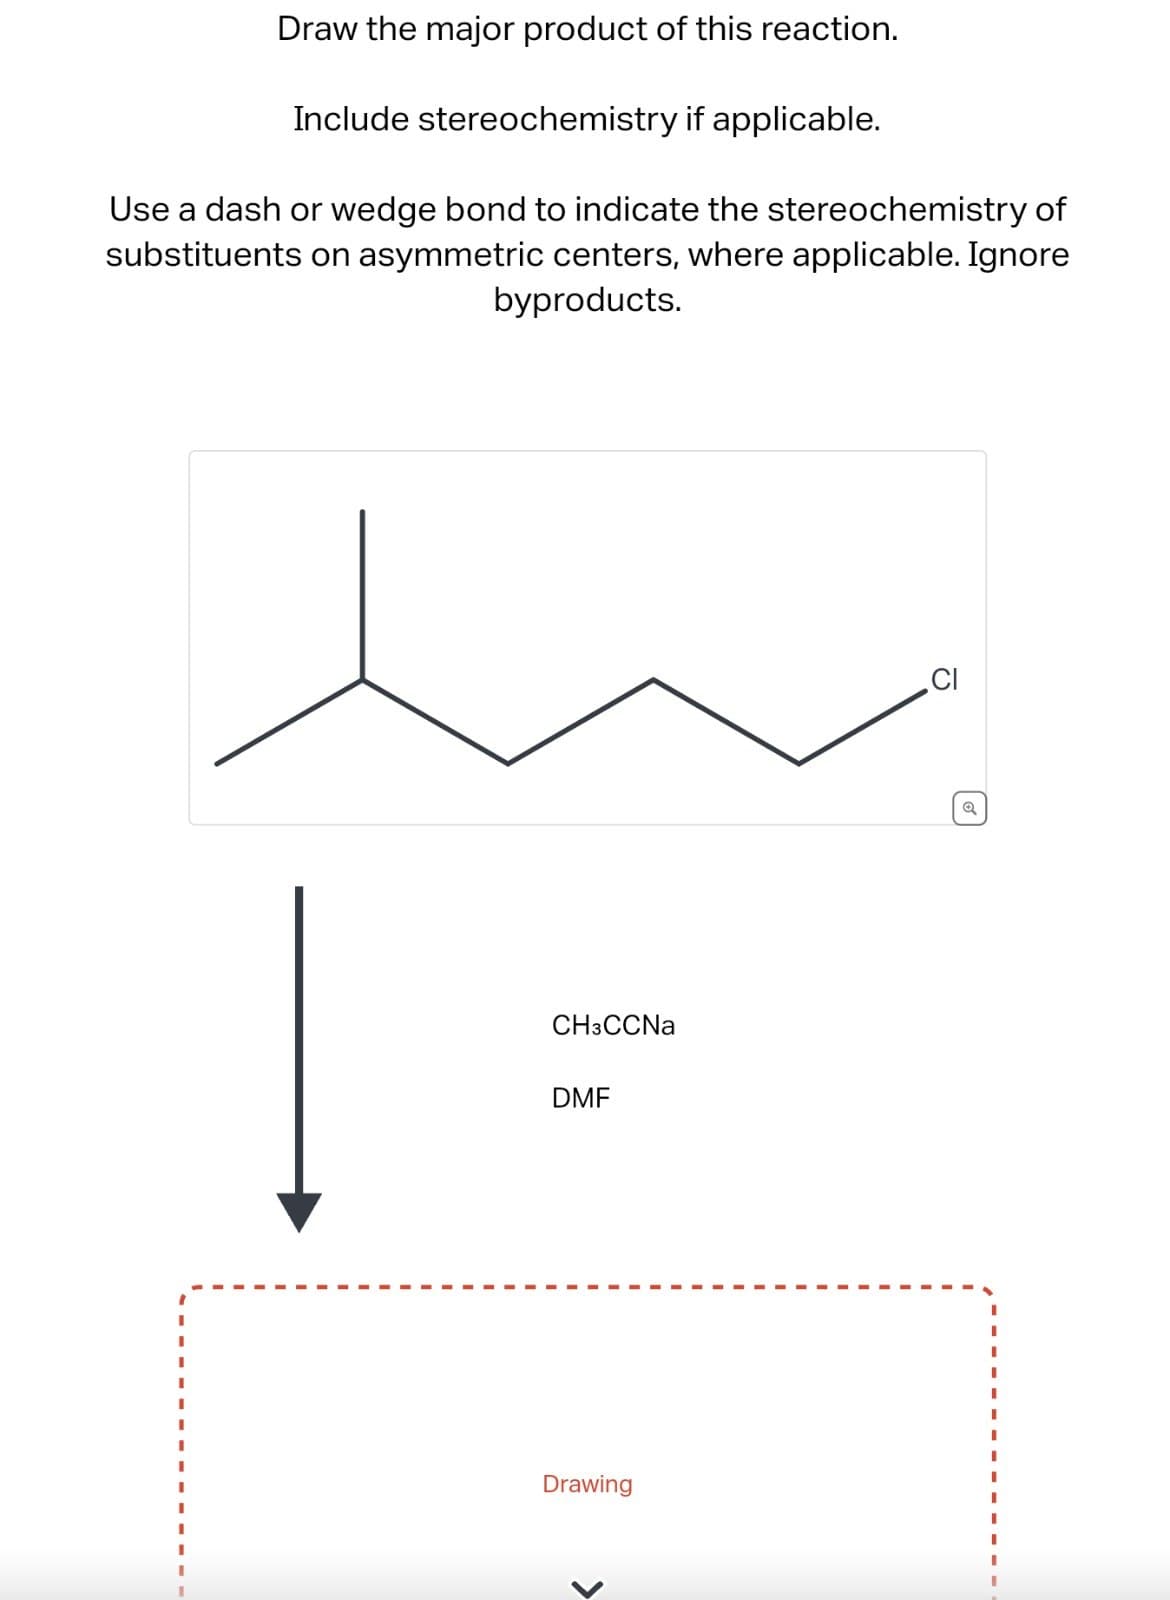 Draw the major product of this reaction.
Include stereochemistry if applicable.
Use a dash or wedge bond to indicate the stereochemistry of
substituents on asymmetric centers, where applicable. Ignore
byproducts.
I
CH3CCNa
DMF
CI
Q
I
I
Drawing
I